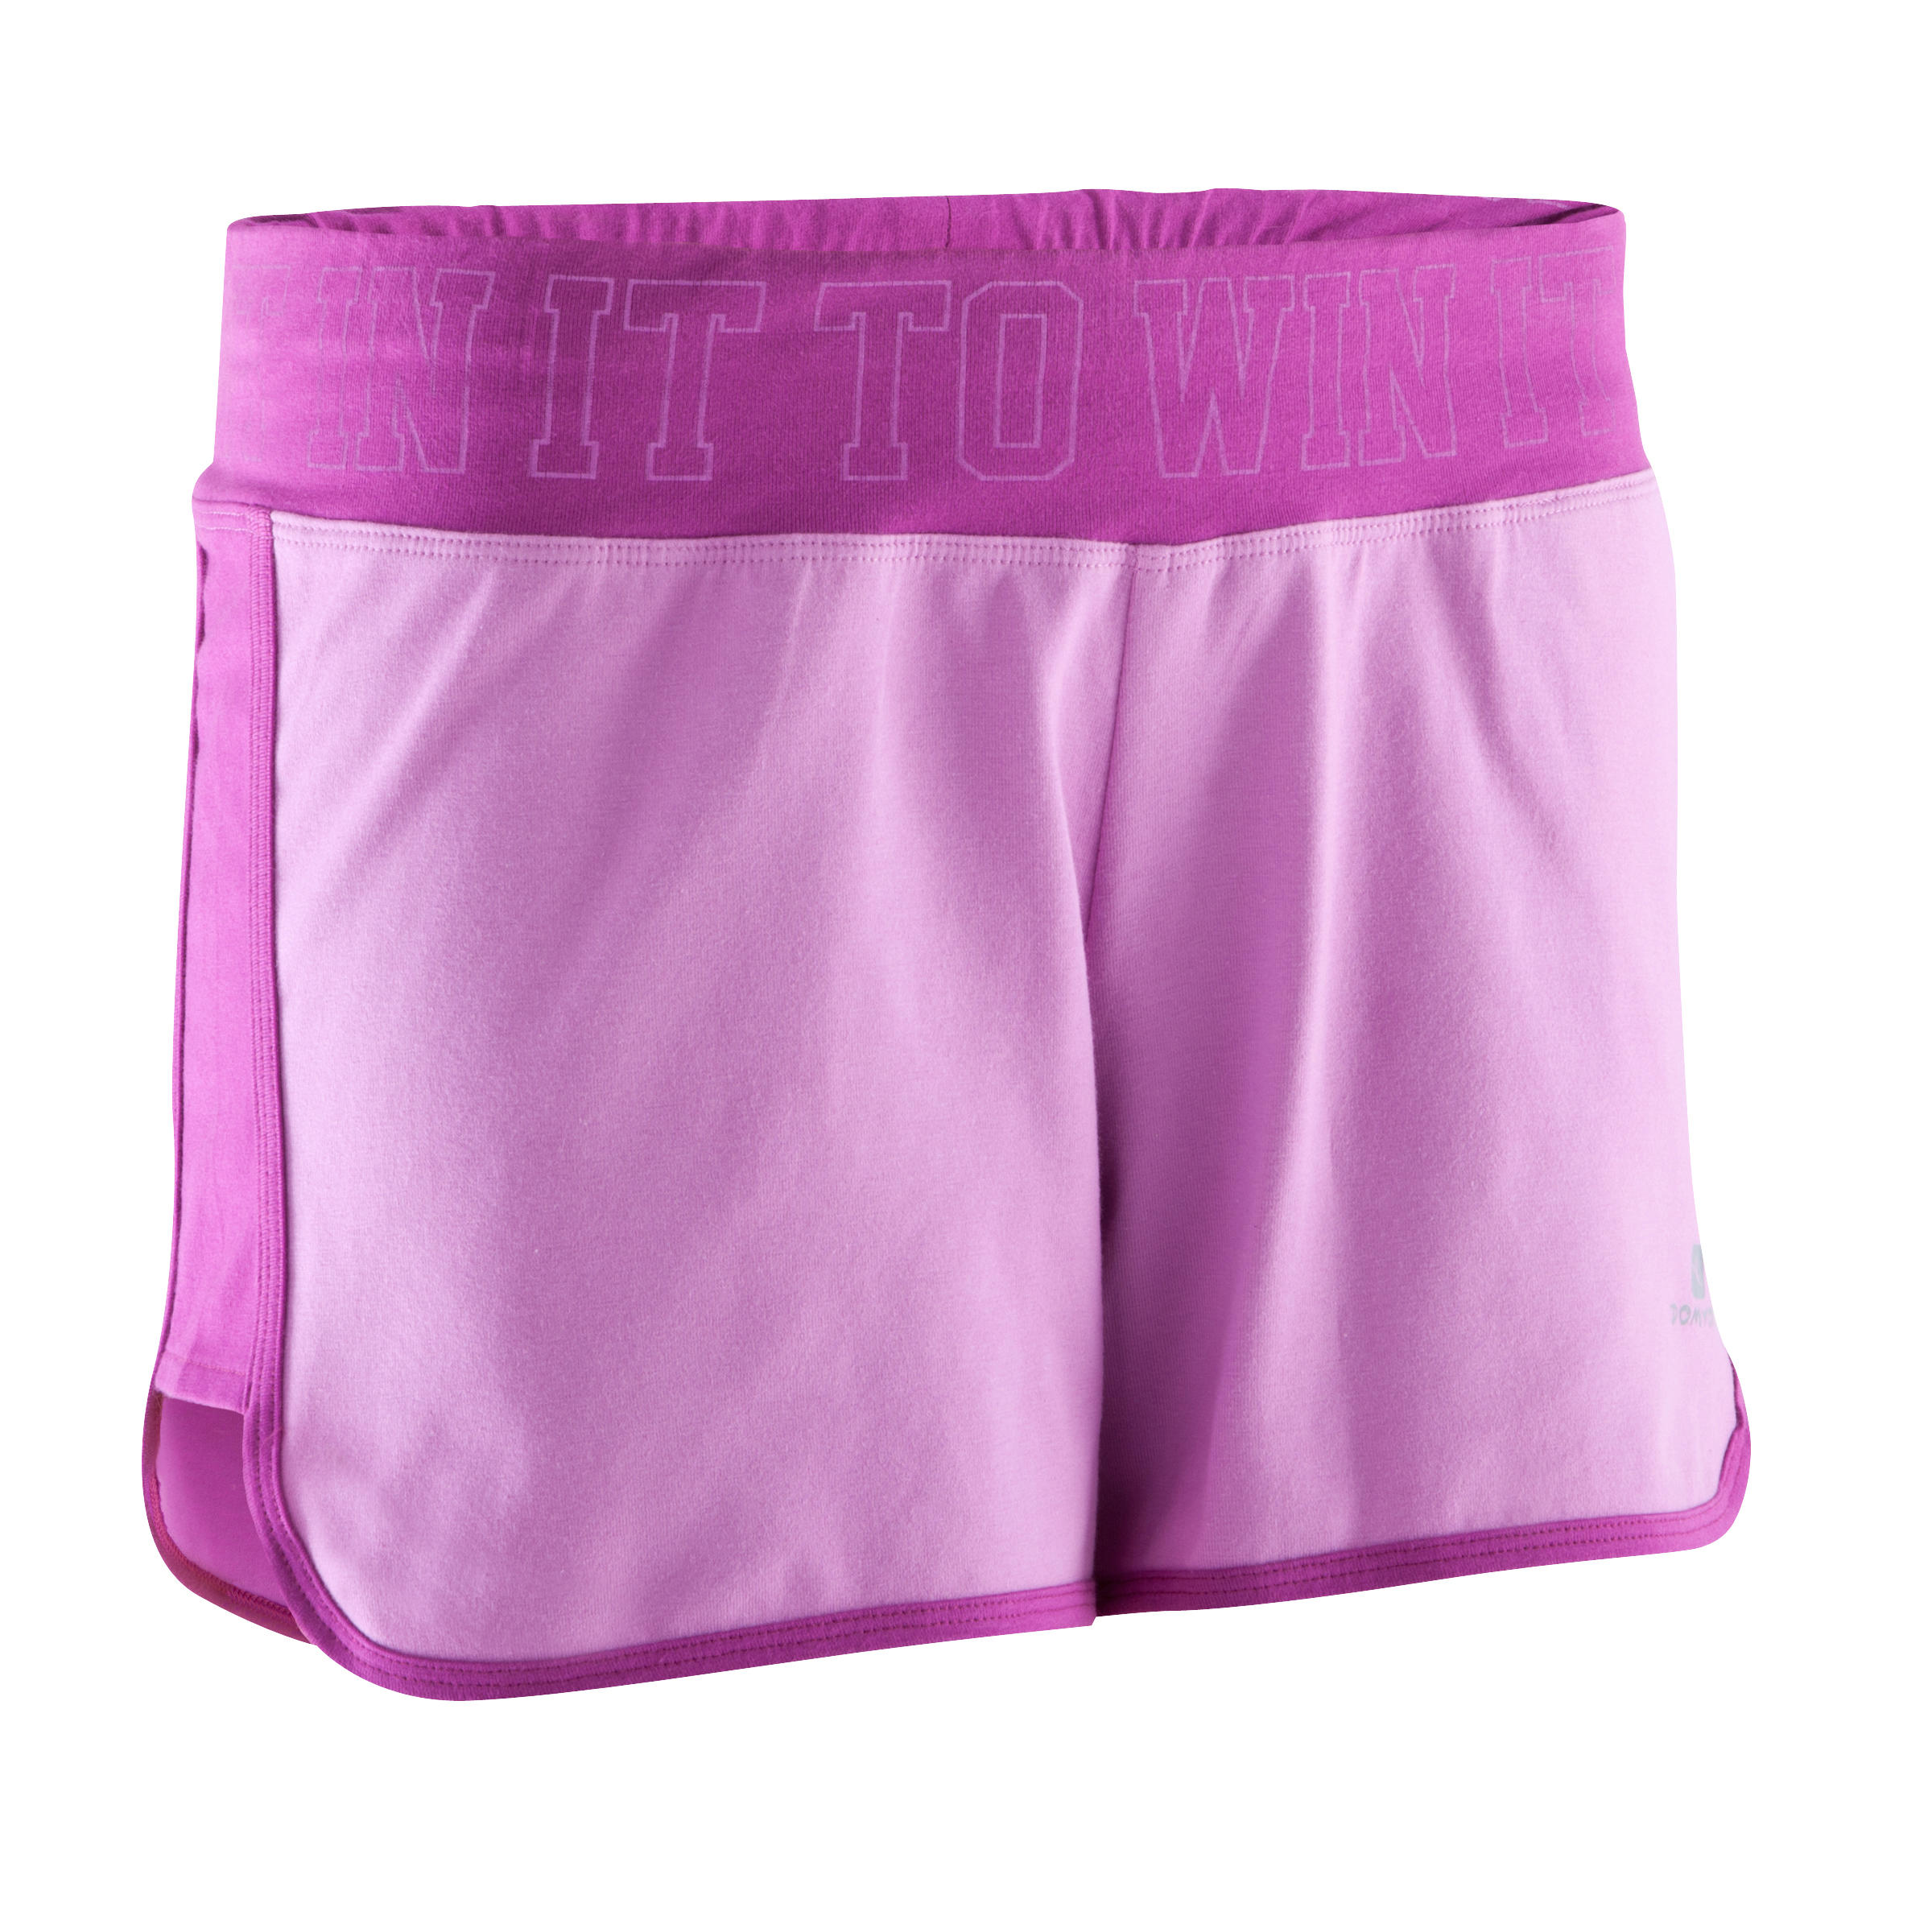 Women's Fitness Shorts with Contrasting Print Waistband - Mauve/Dark Pink 1/11